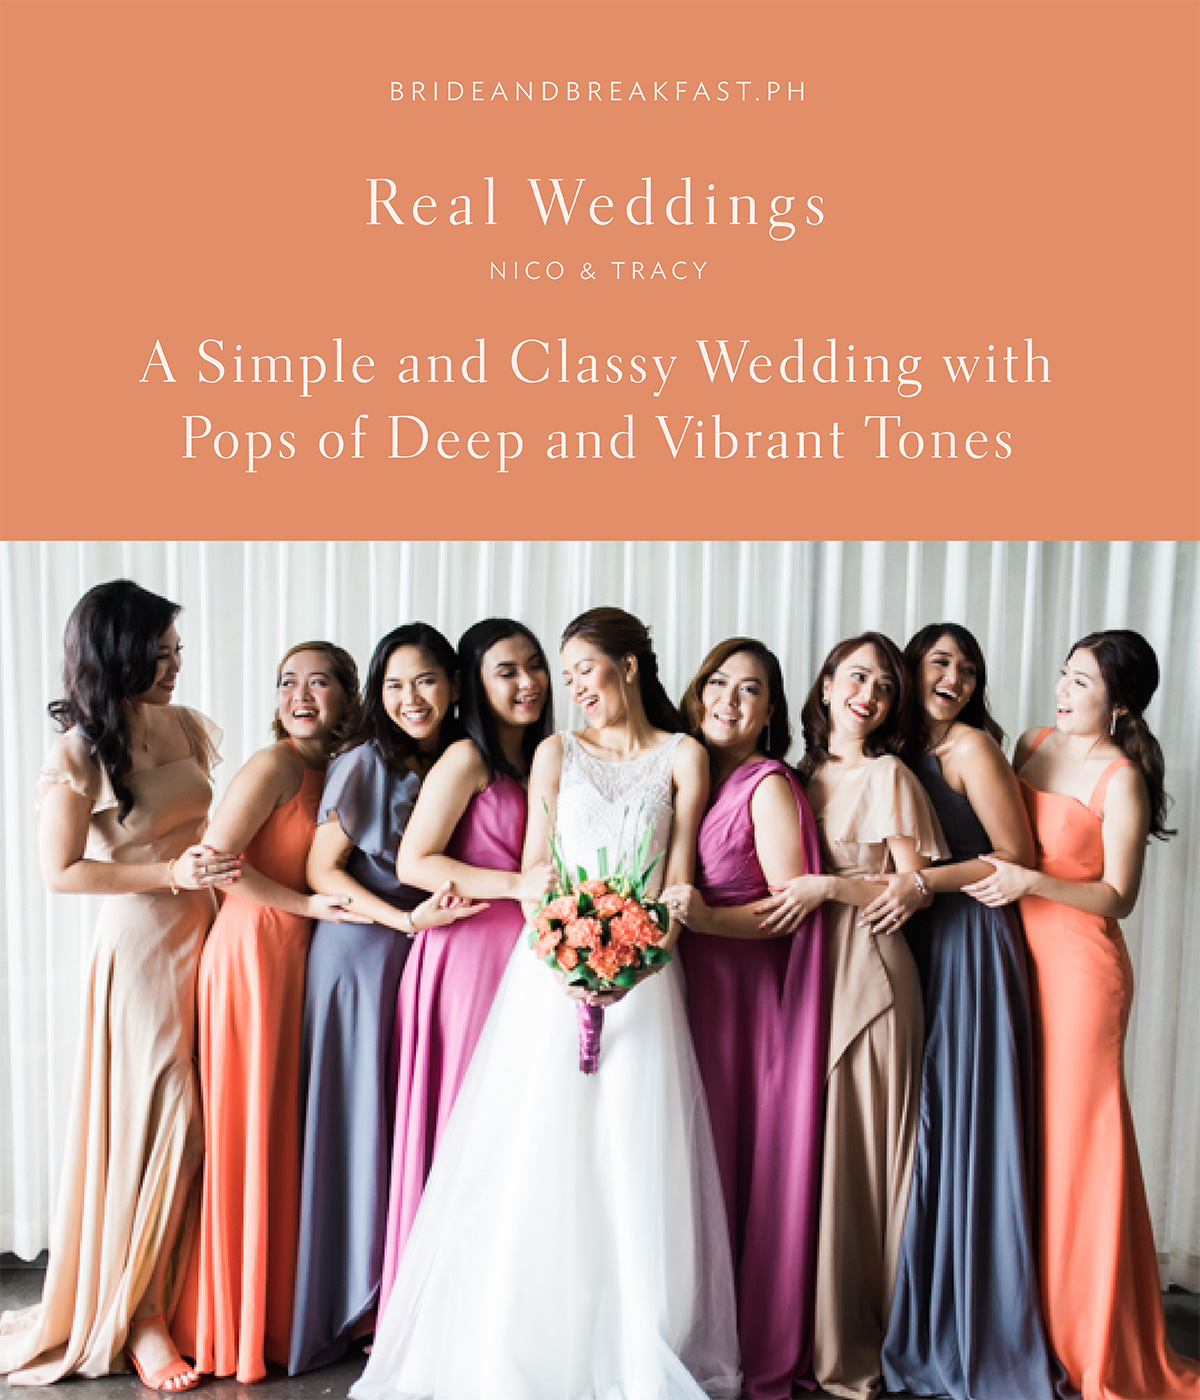 A Simple and Classy Wedding with Pops of Deep and Vibrant Tones